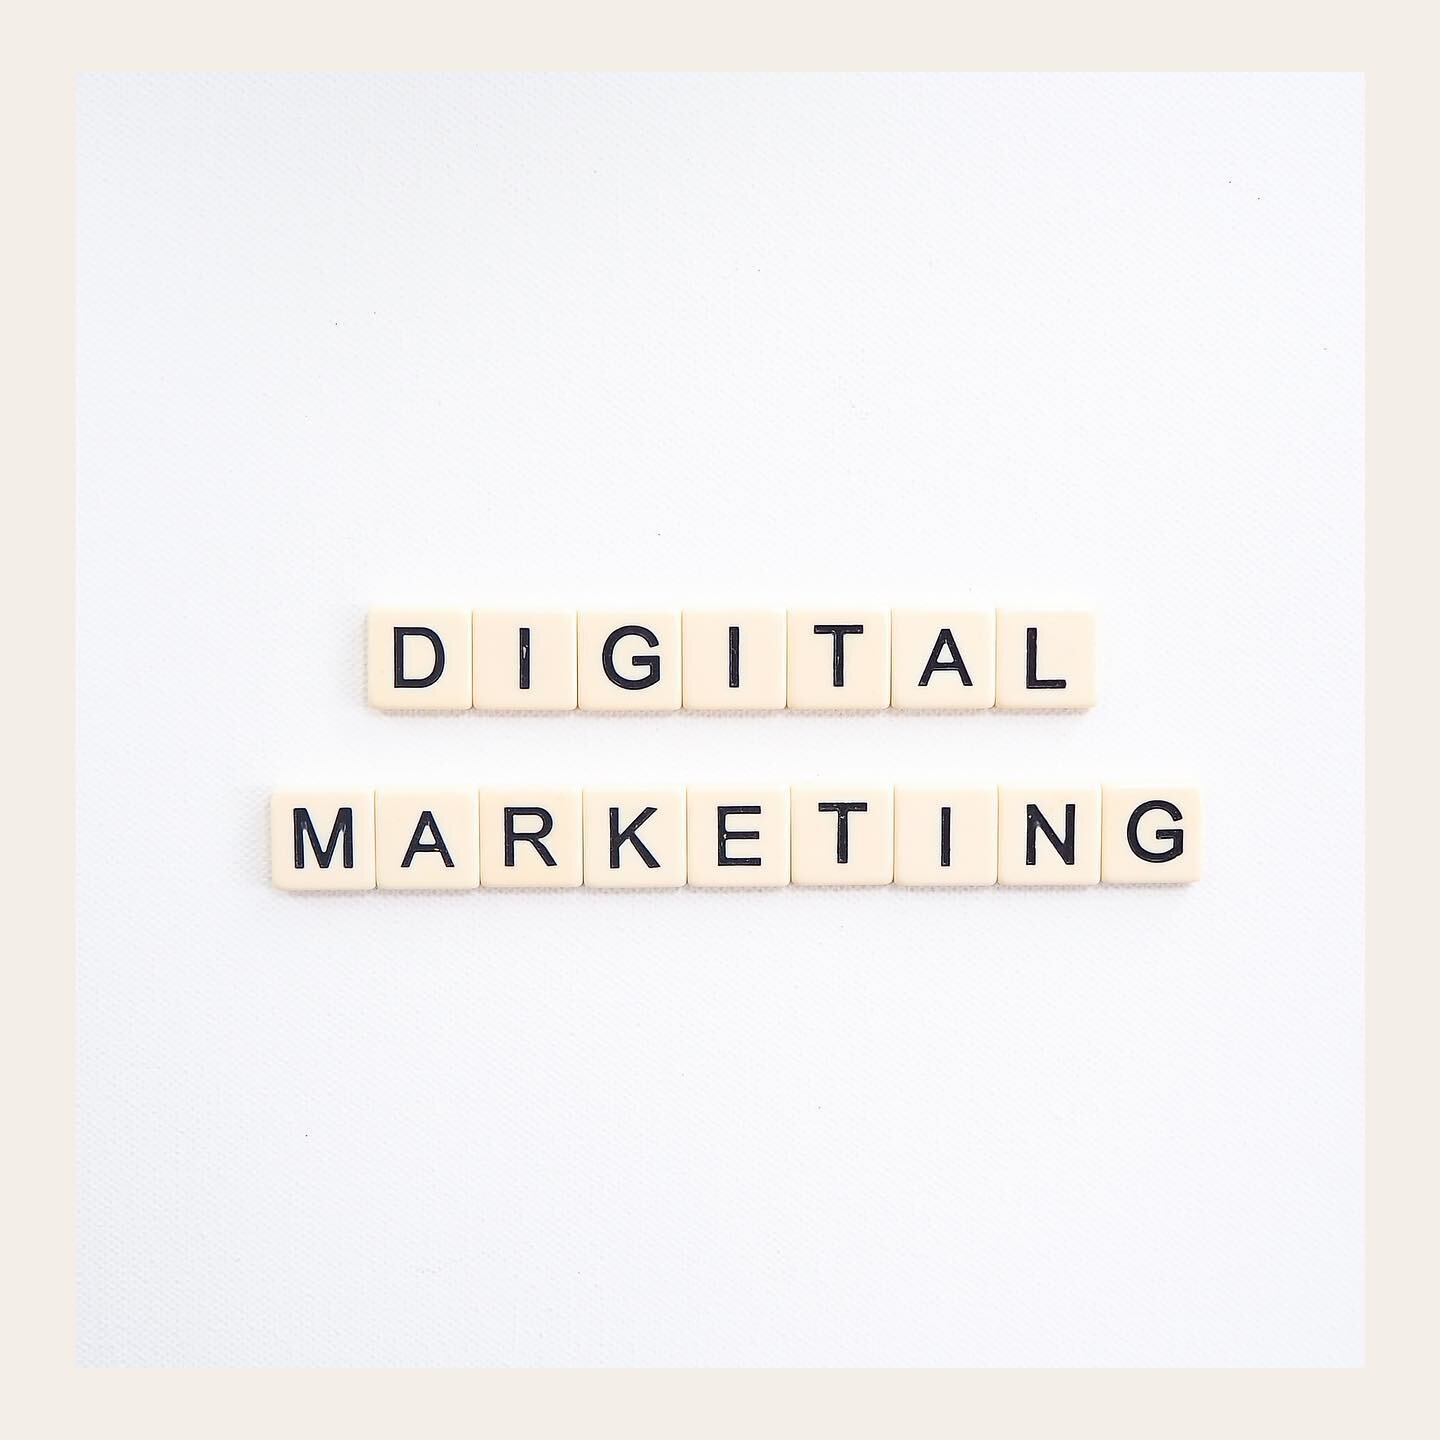 Marketing messages surround us every single day.⁣
⁣
How can you break through the noise?⁣
⁣
Become an absolute expert in your industry. Regardless of what industry you&rsquo;re in, your messaging will help you stand out in your niche.⁣
⁣
You need to 